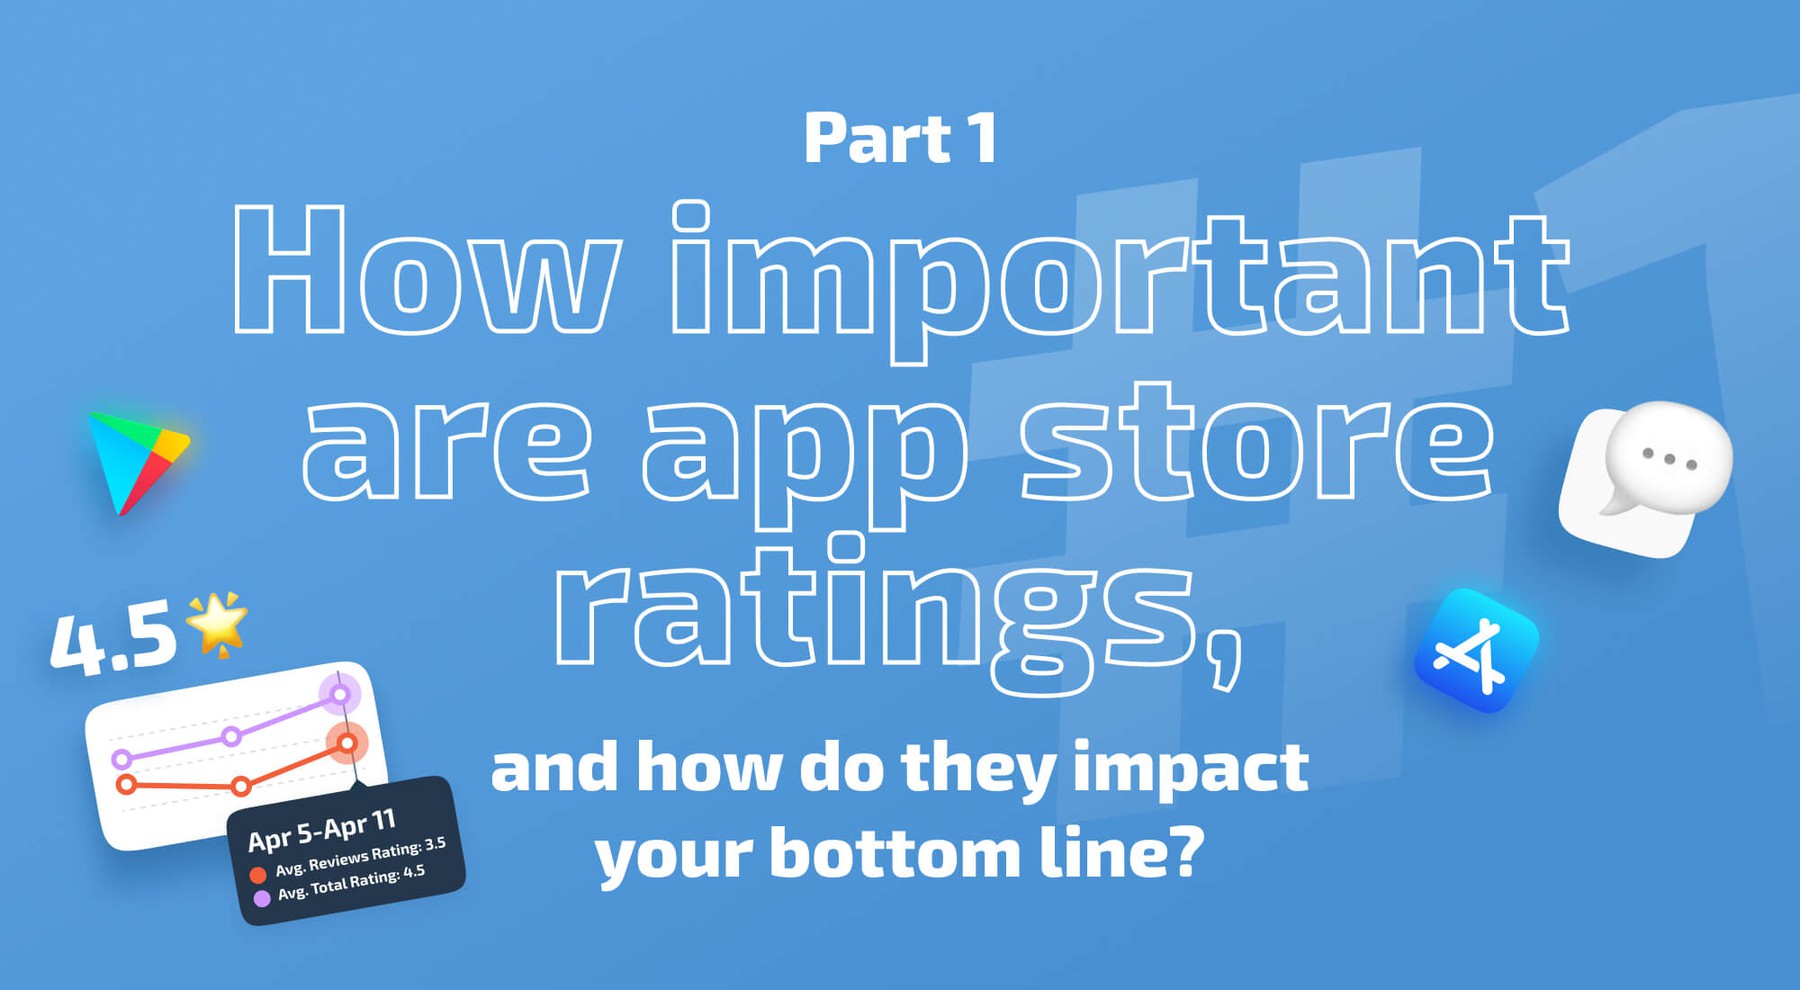 How important are app store ratings, and how do they impact your bottom line?